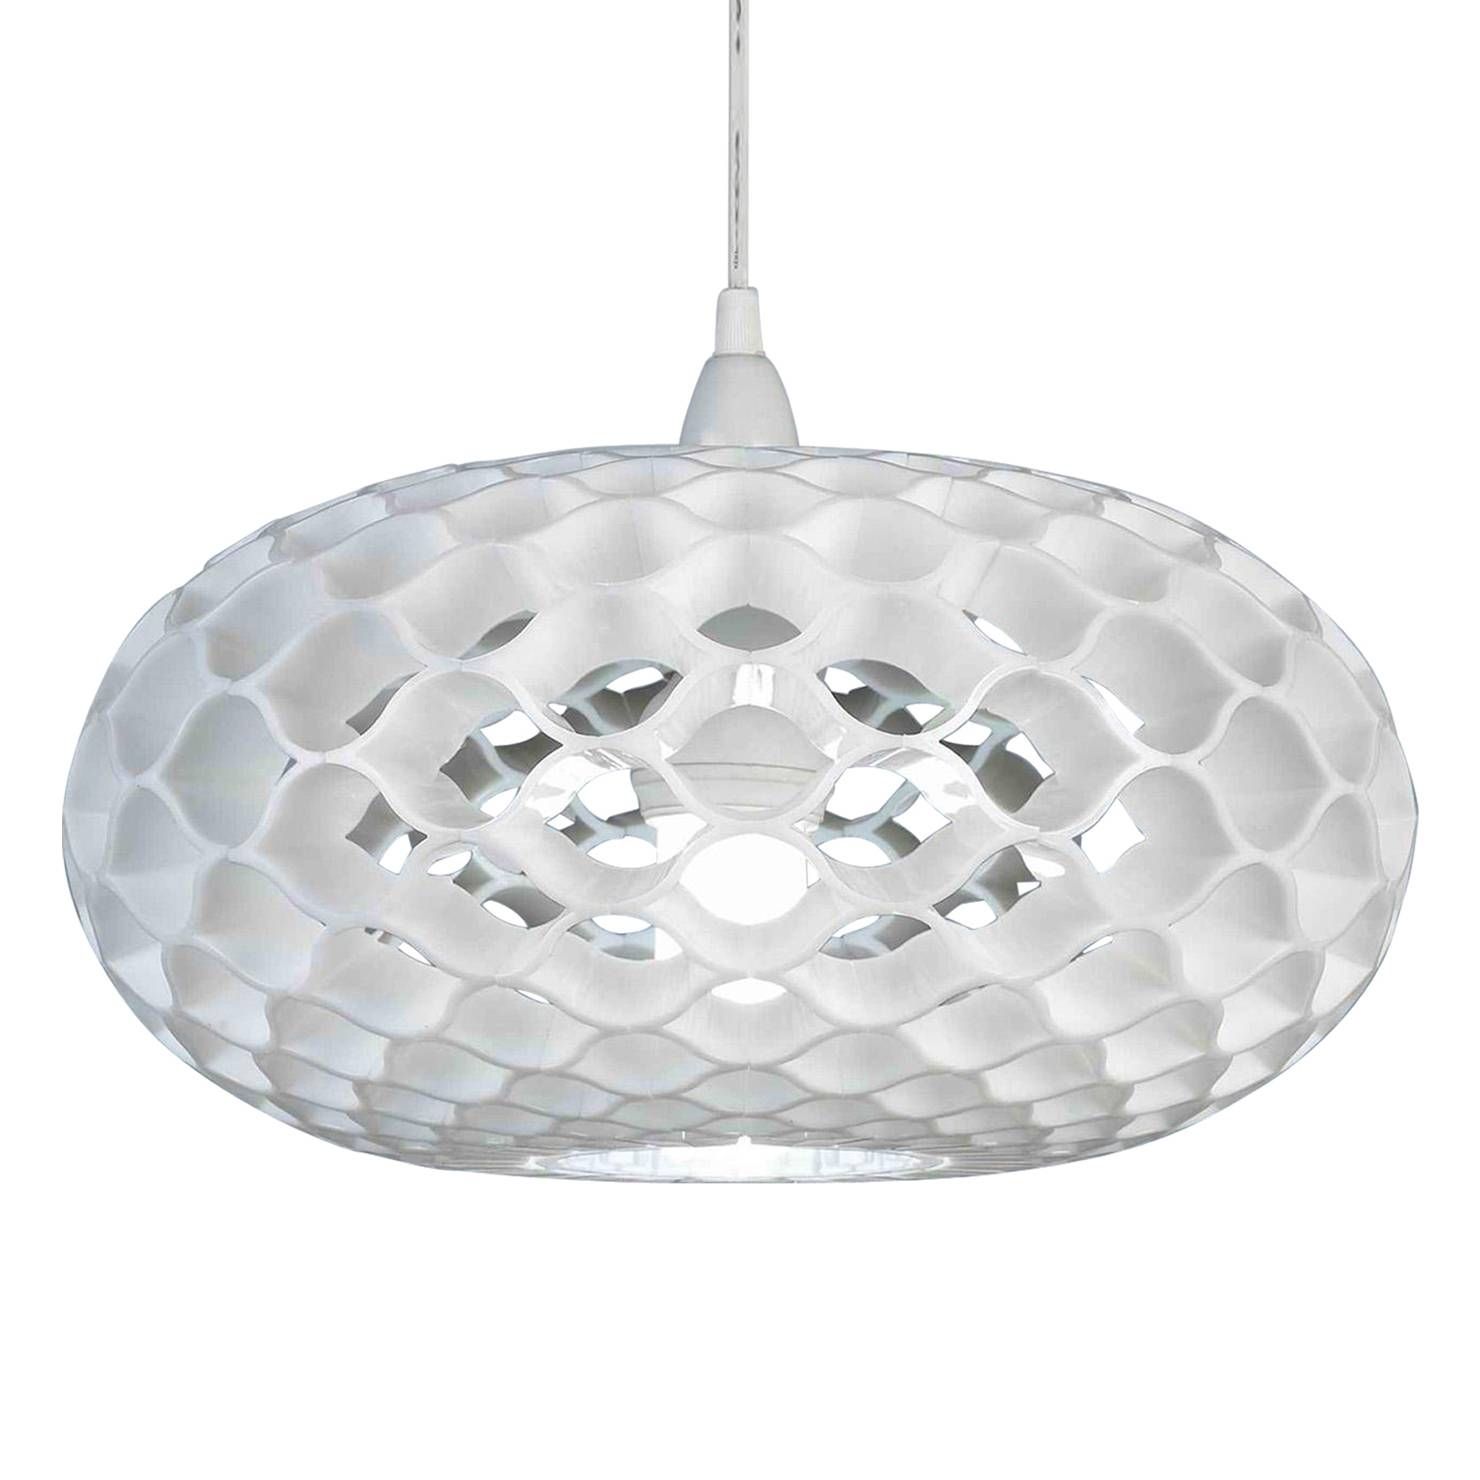 Russell Lowe – Honeycomb Pendant Light Shade, White | Achica With Regard To Honeycomb Pendant Lights (View 6 of 15)